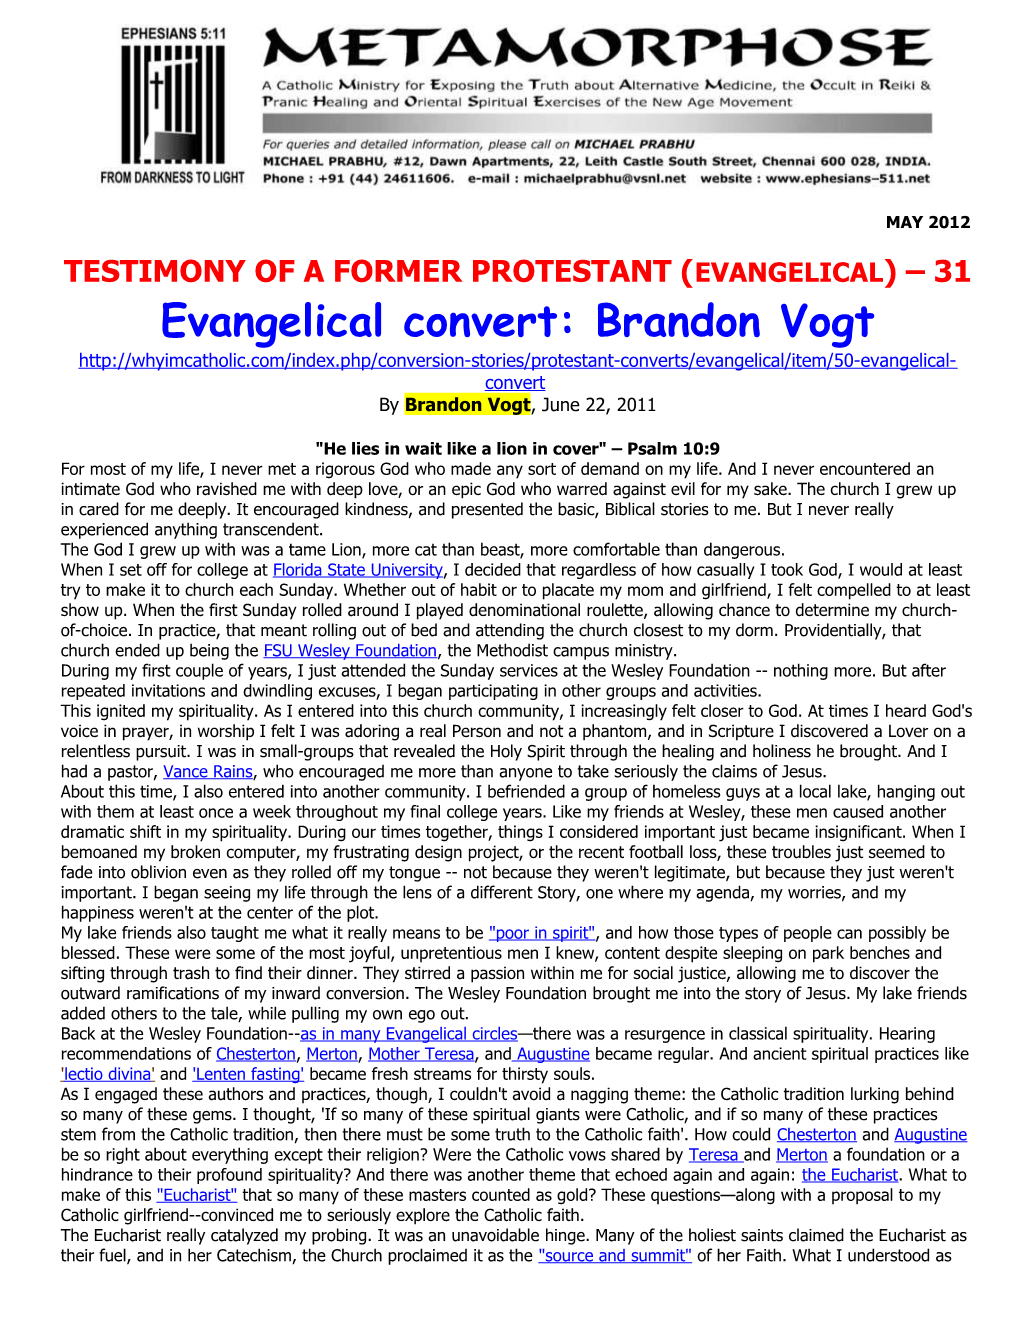 Testimony of a Former Protestant (Evangelical) 31